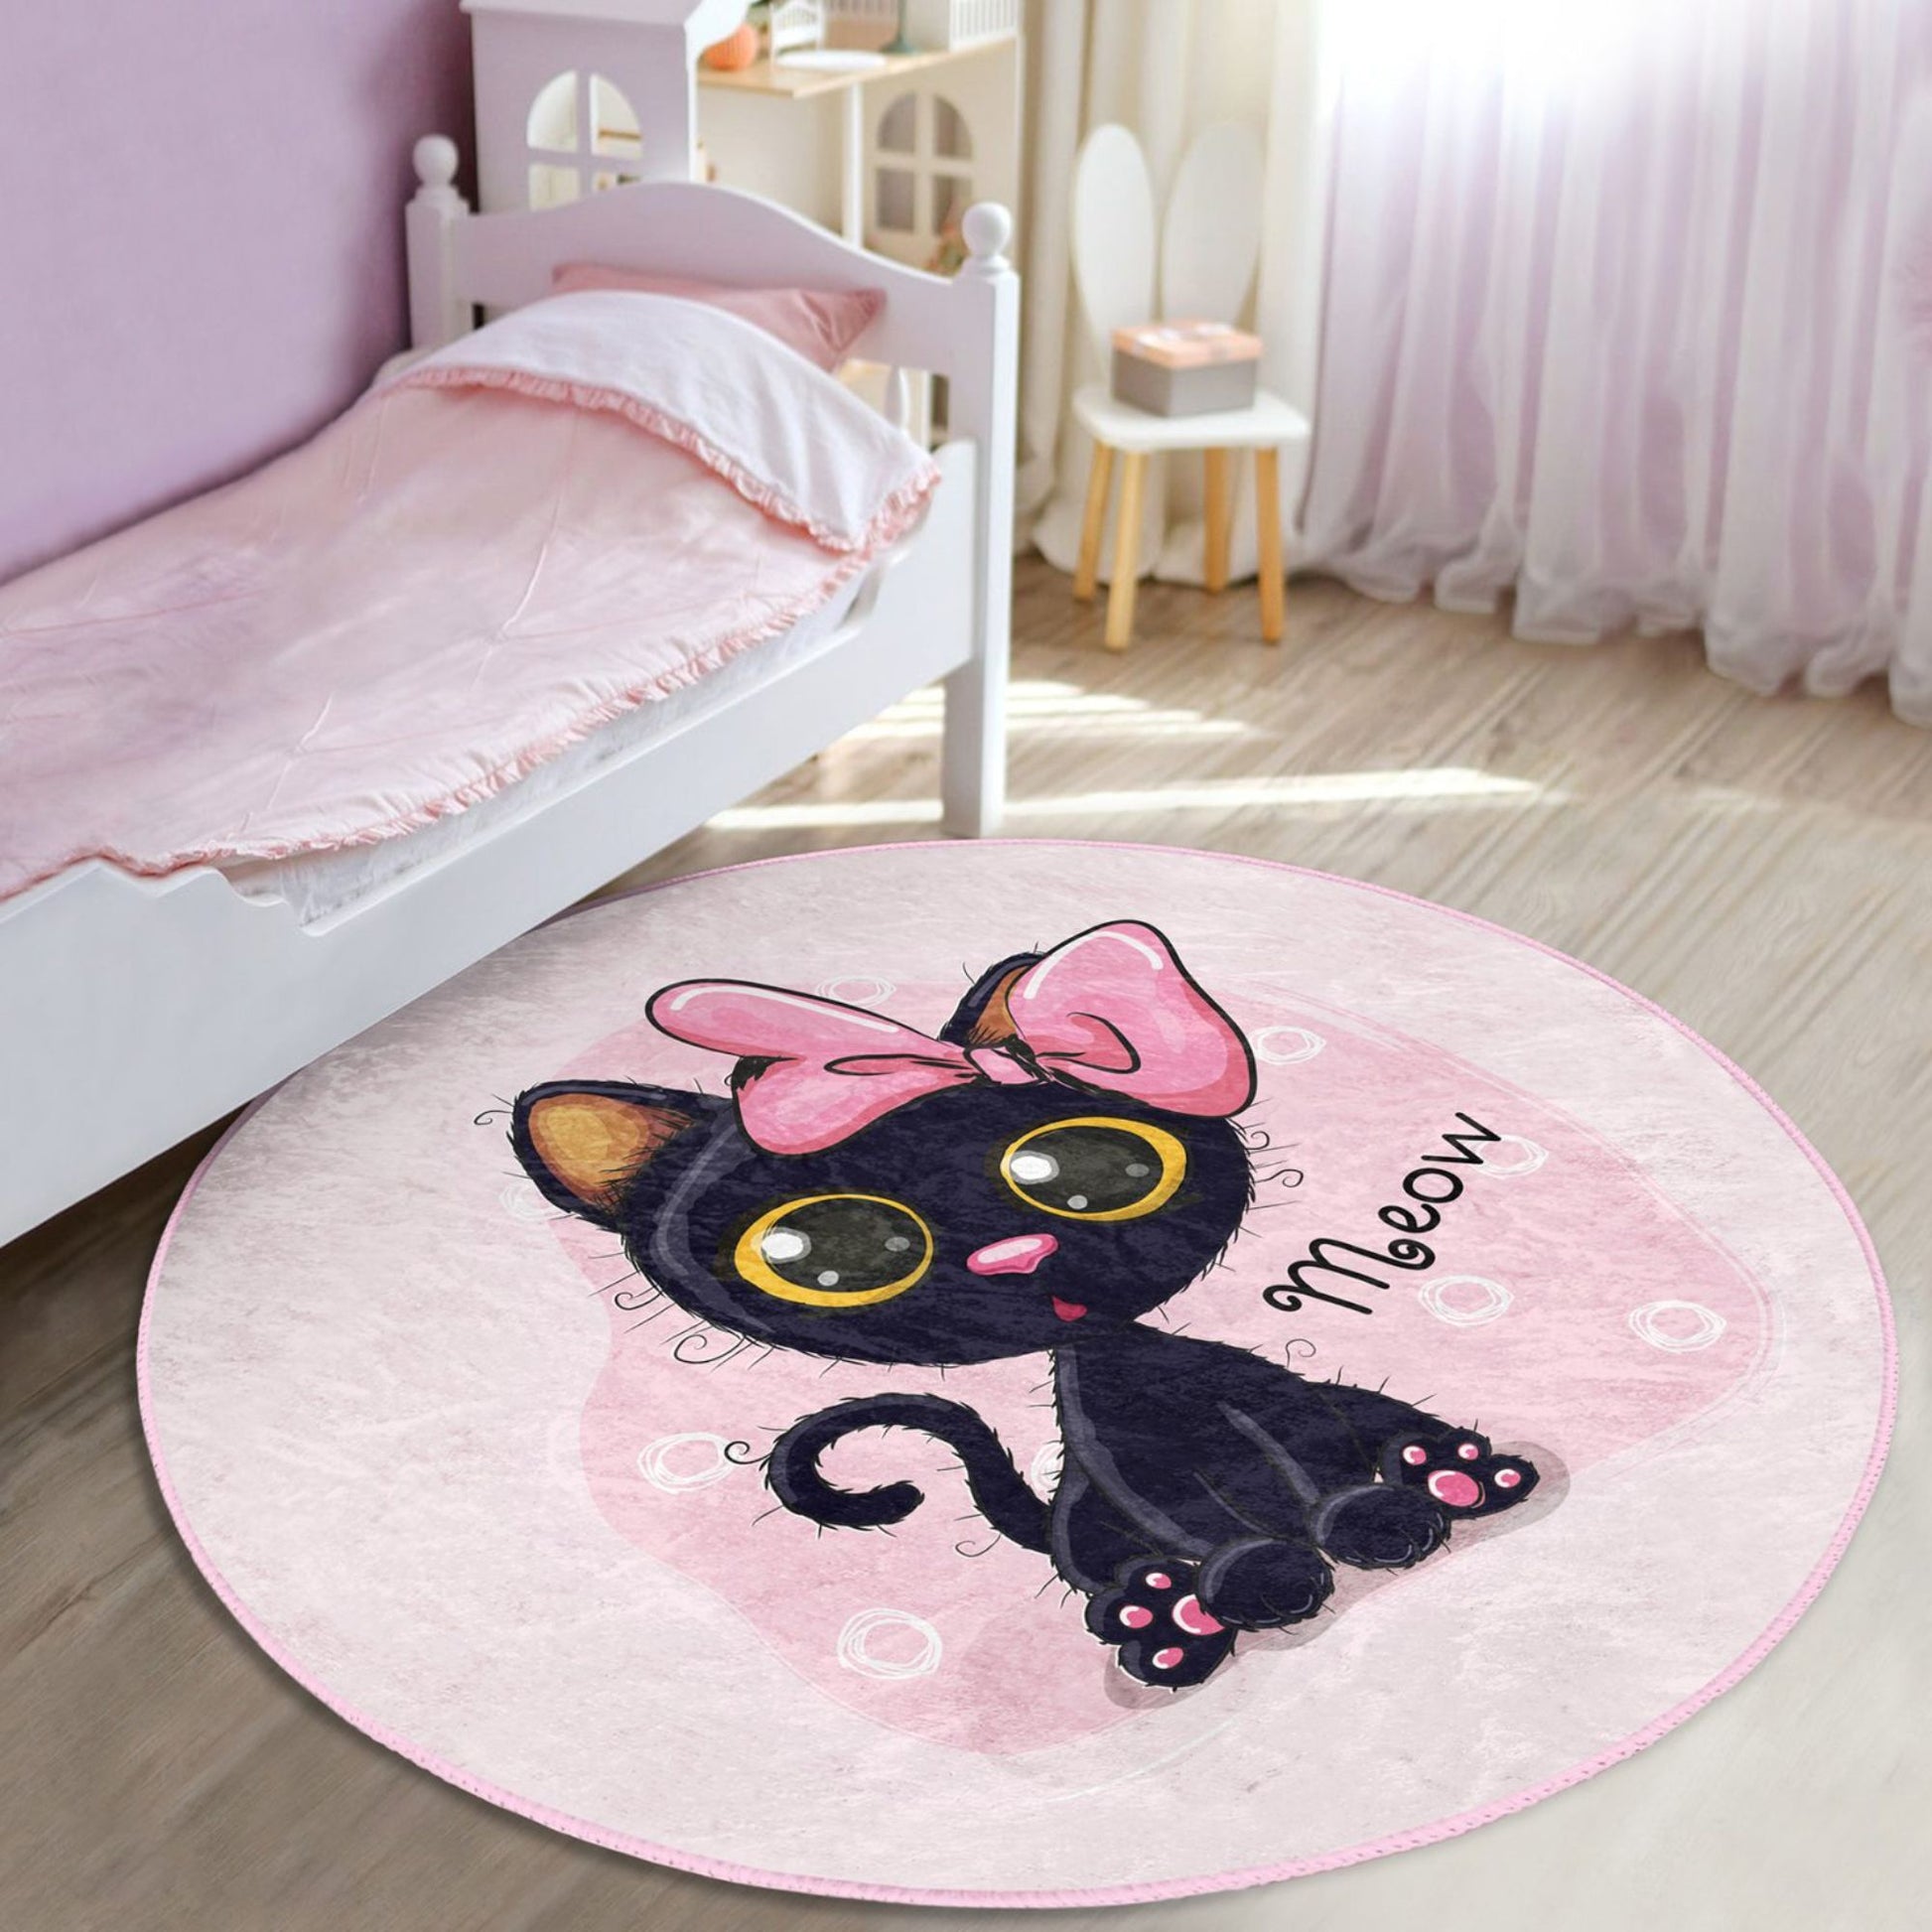 Adorable Pink Little Kitty Design Decorative Rug